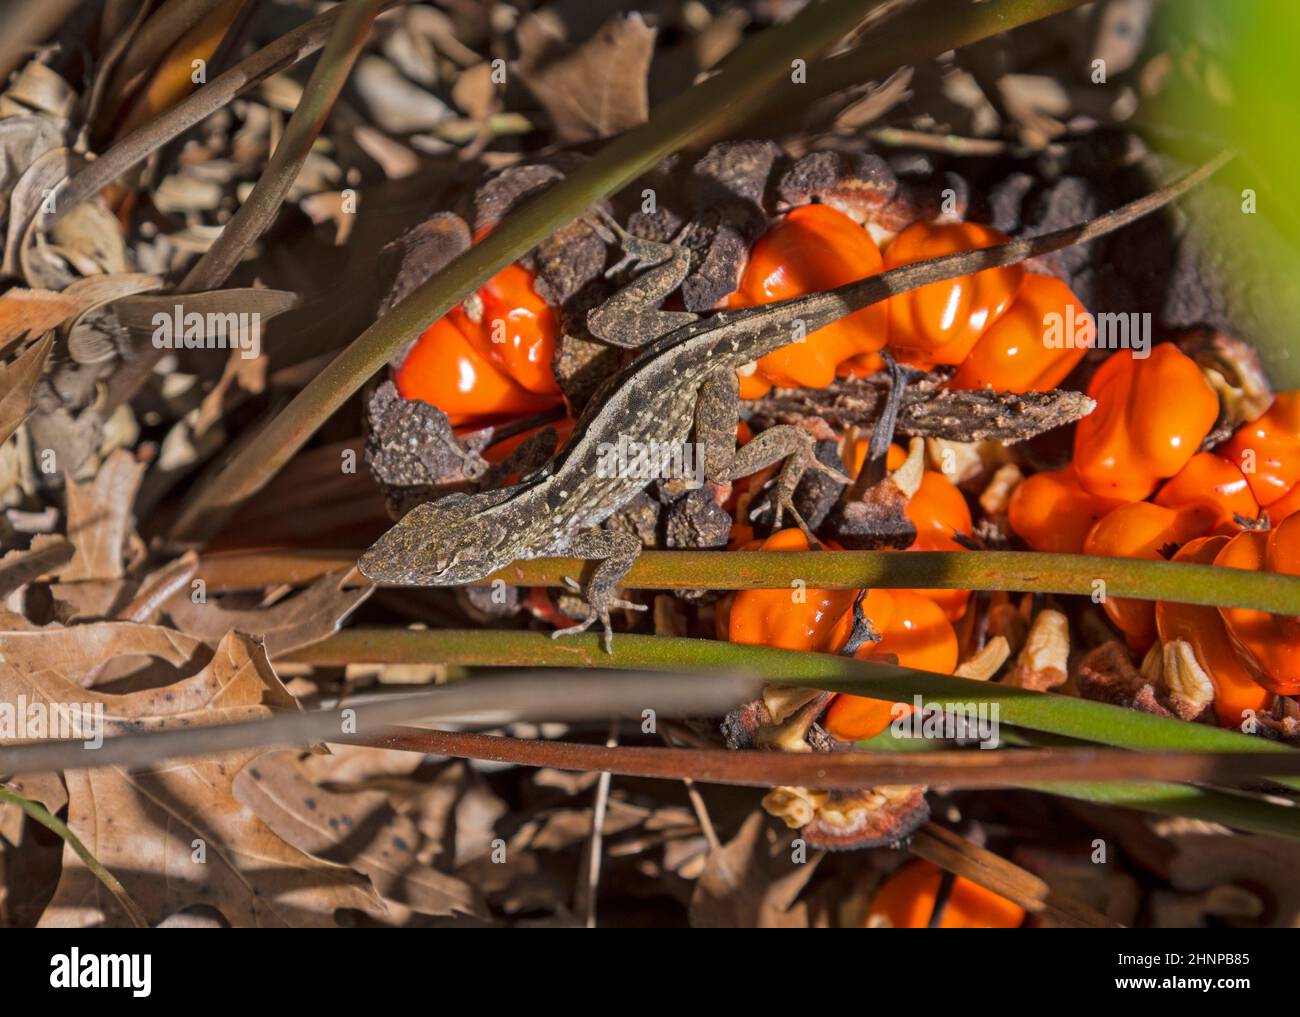 A Cuban Brown Anole lizard on the colorful fruit of a landscape plant in a North Florida Parking Lot. Stock Photo